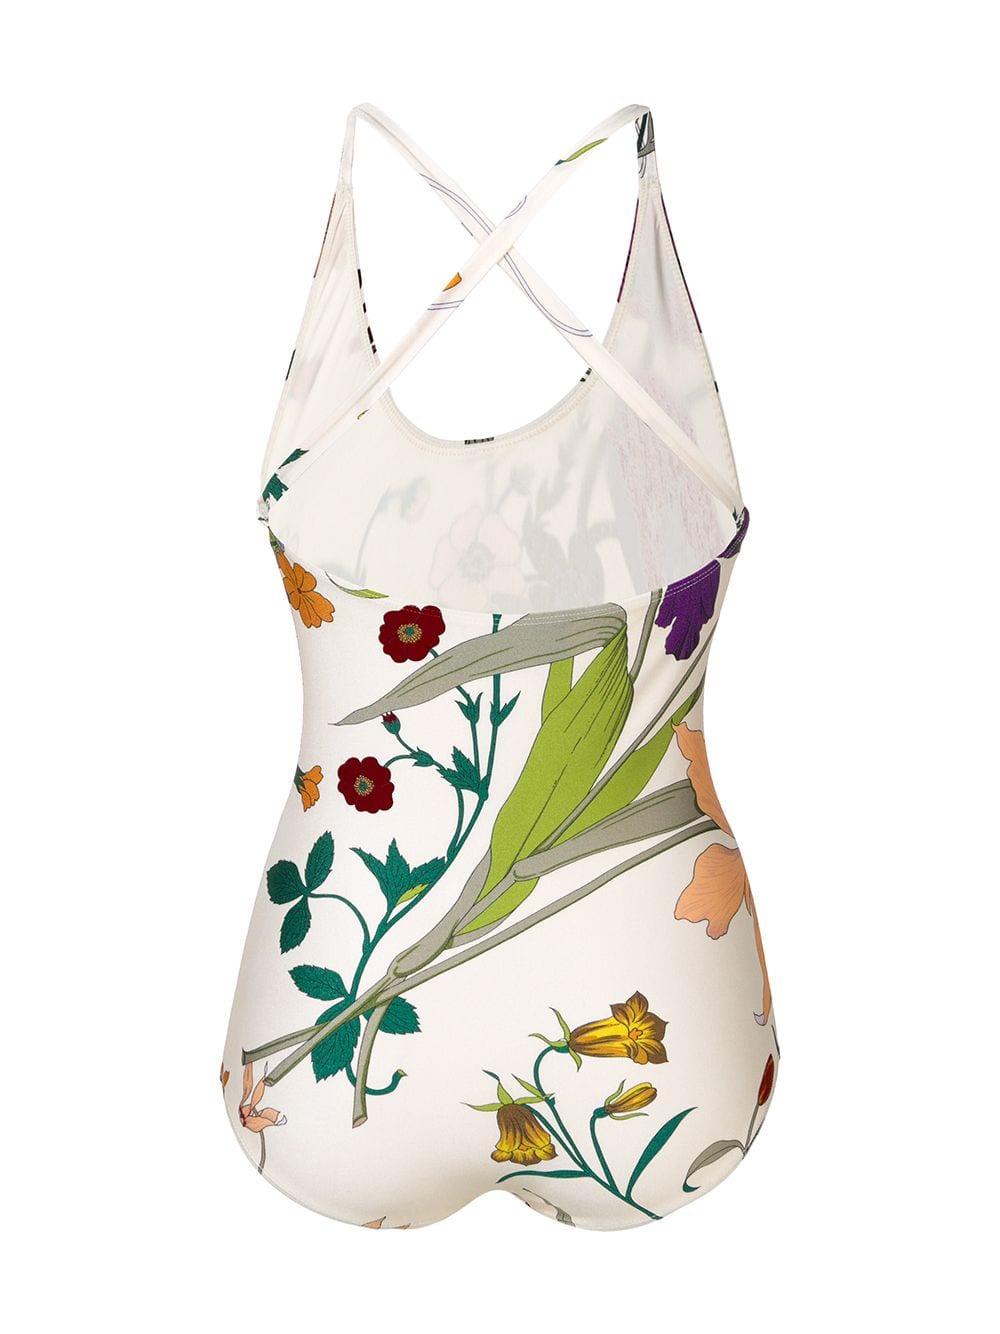 gucci one piece swimsuit white